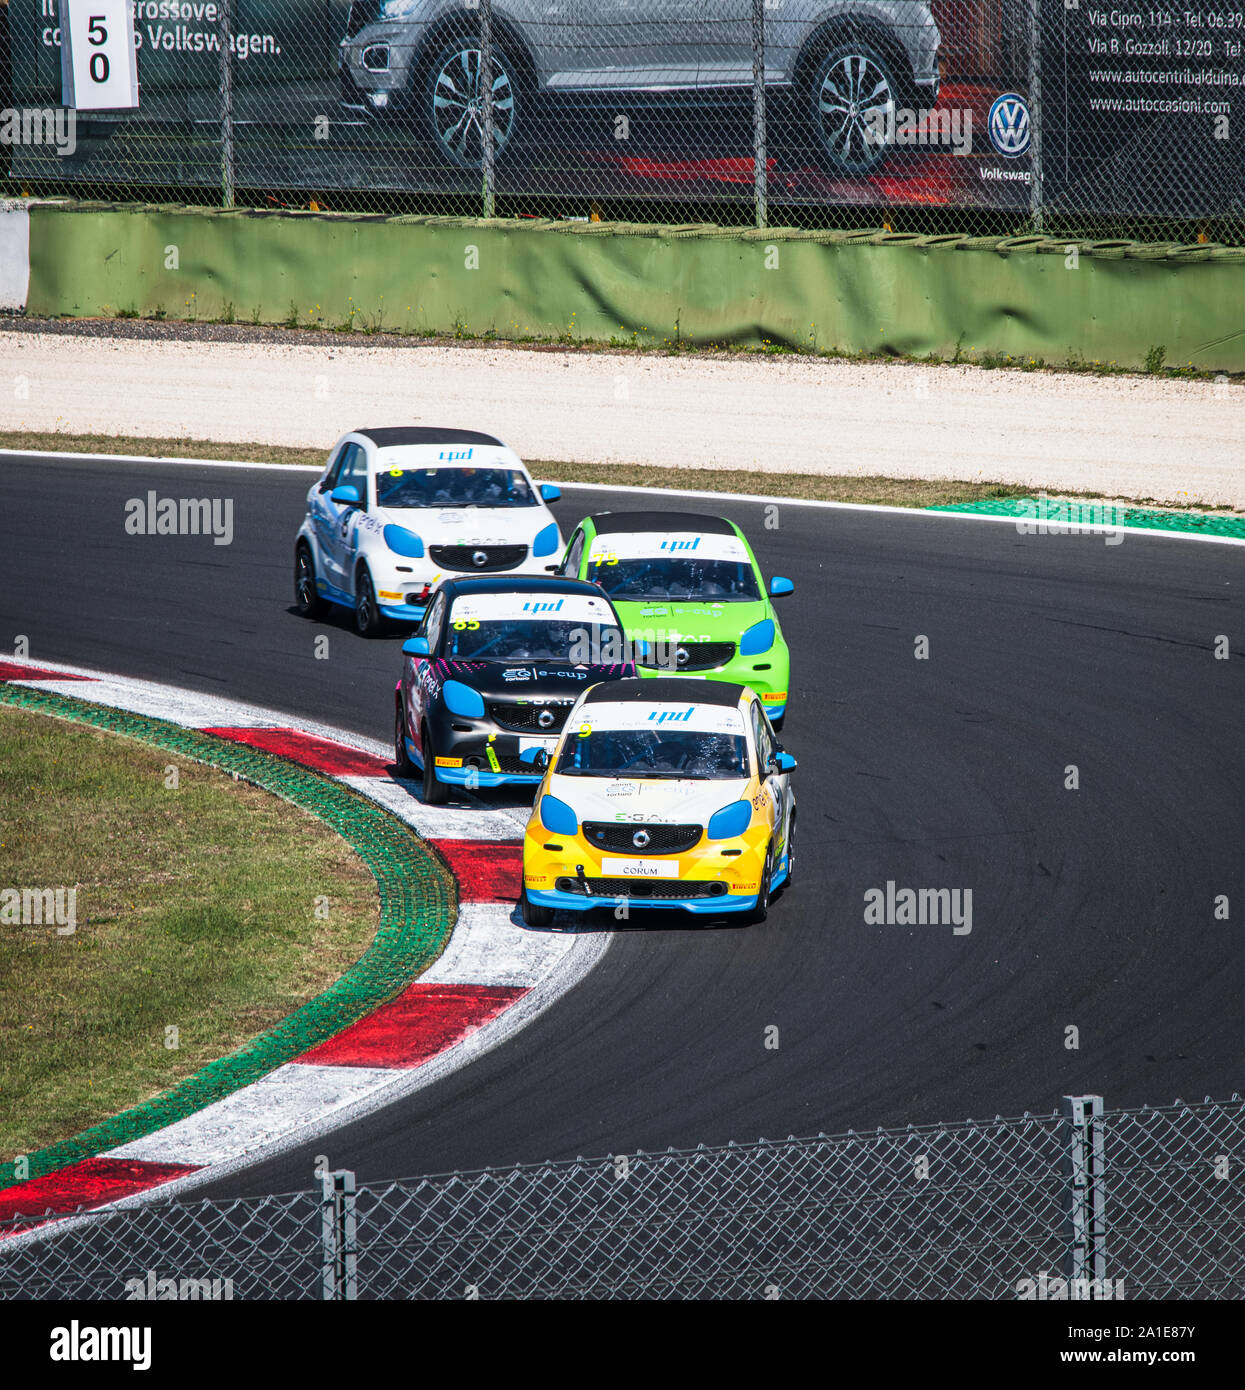 Vallelunga, Italy september 14 2019. High angle view of asphalt circuit with Smart electric engine racing car  in action during the race Stock Photo